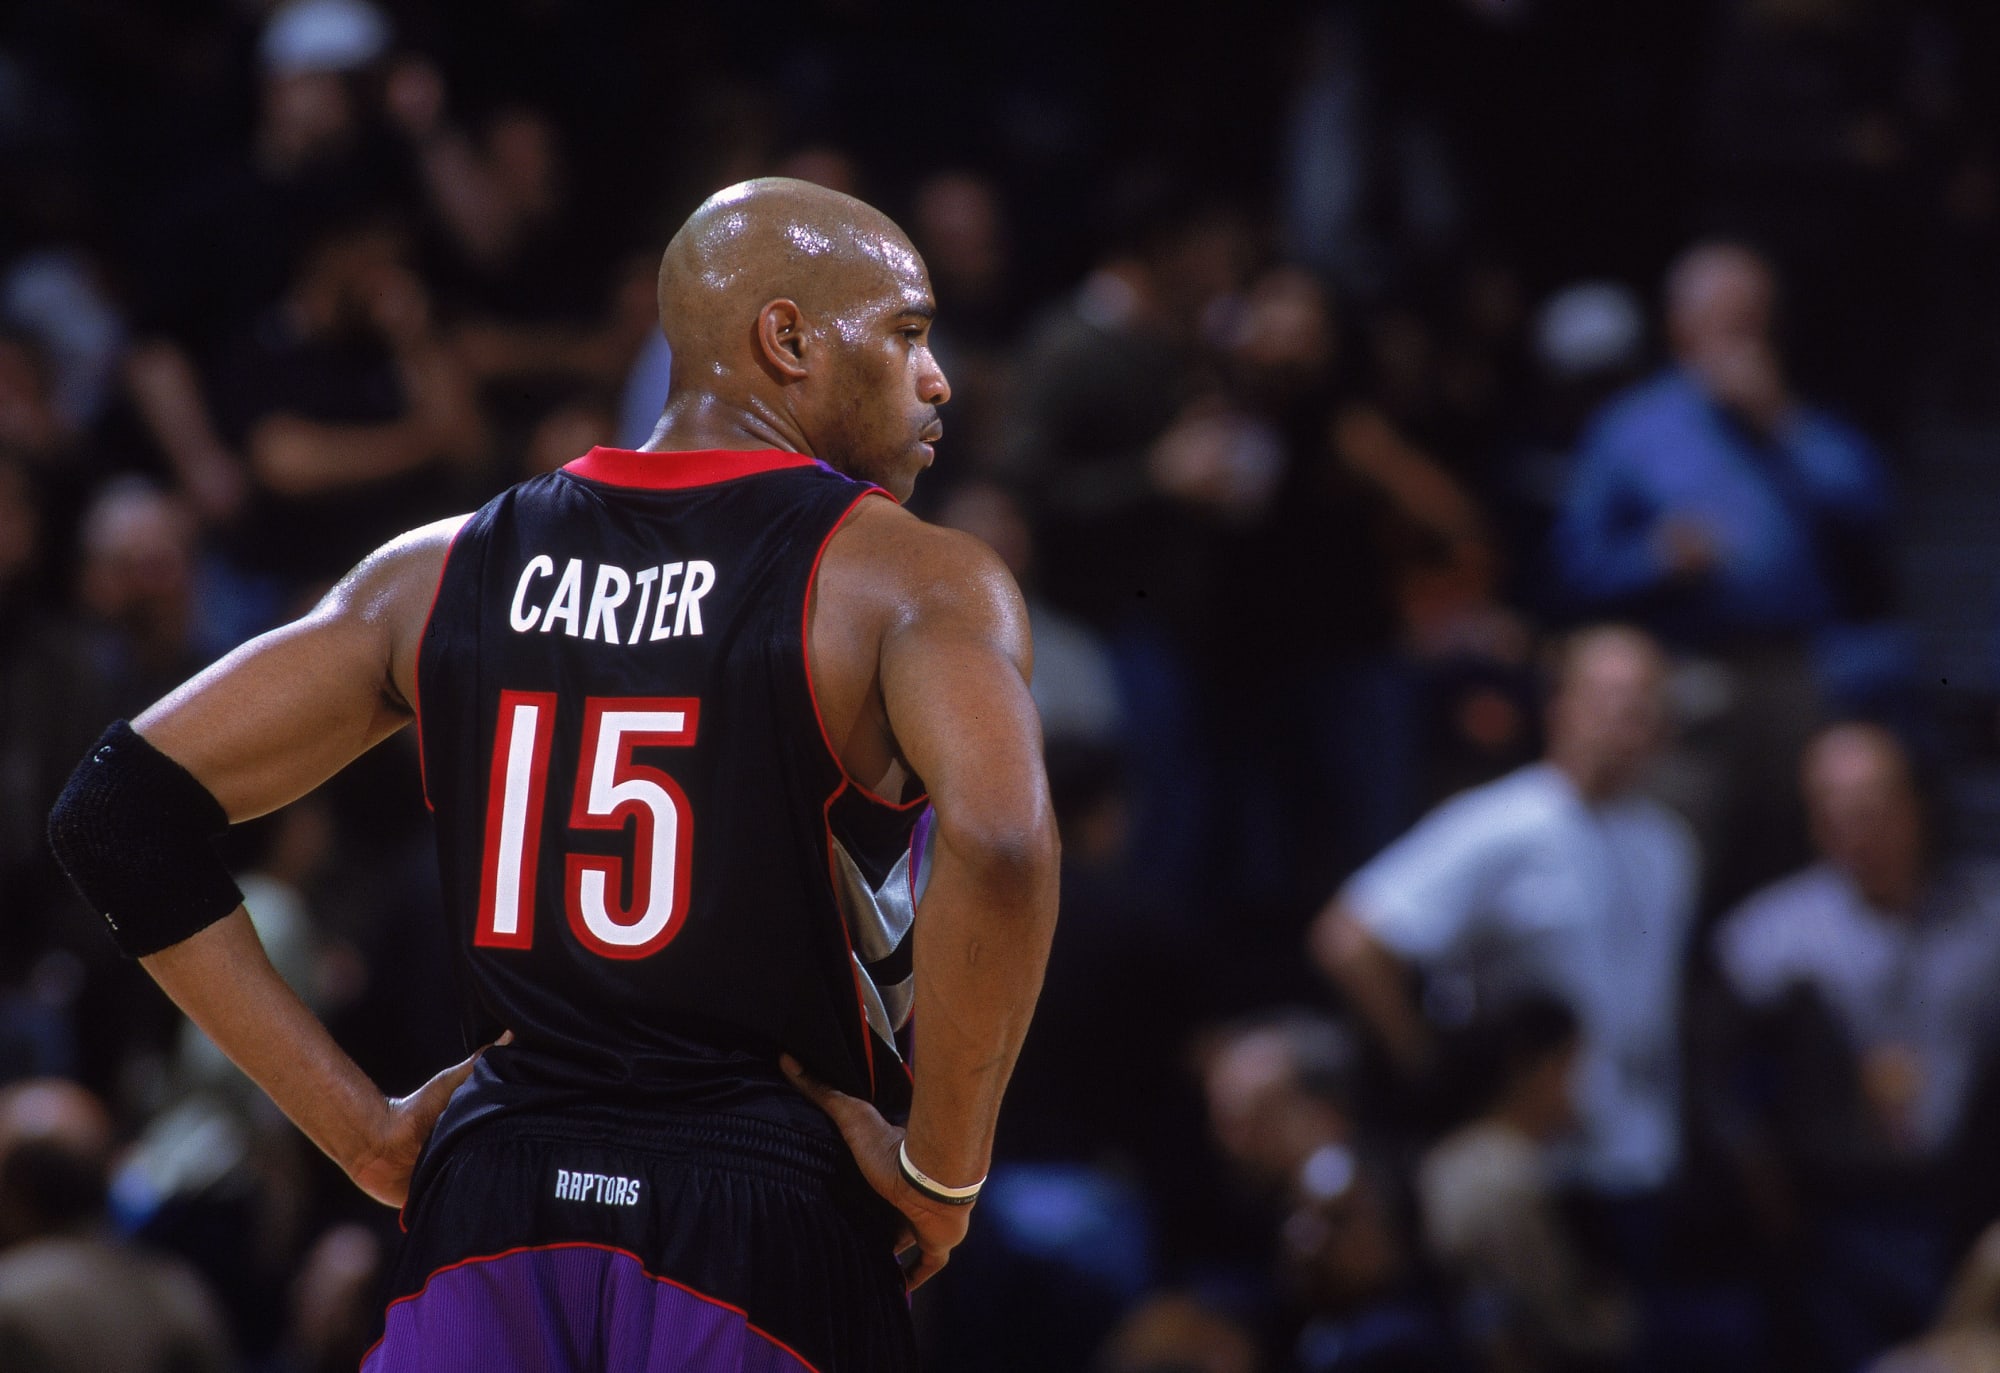 When Vince Carter forced his way out of Toronto - “I don't wanna